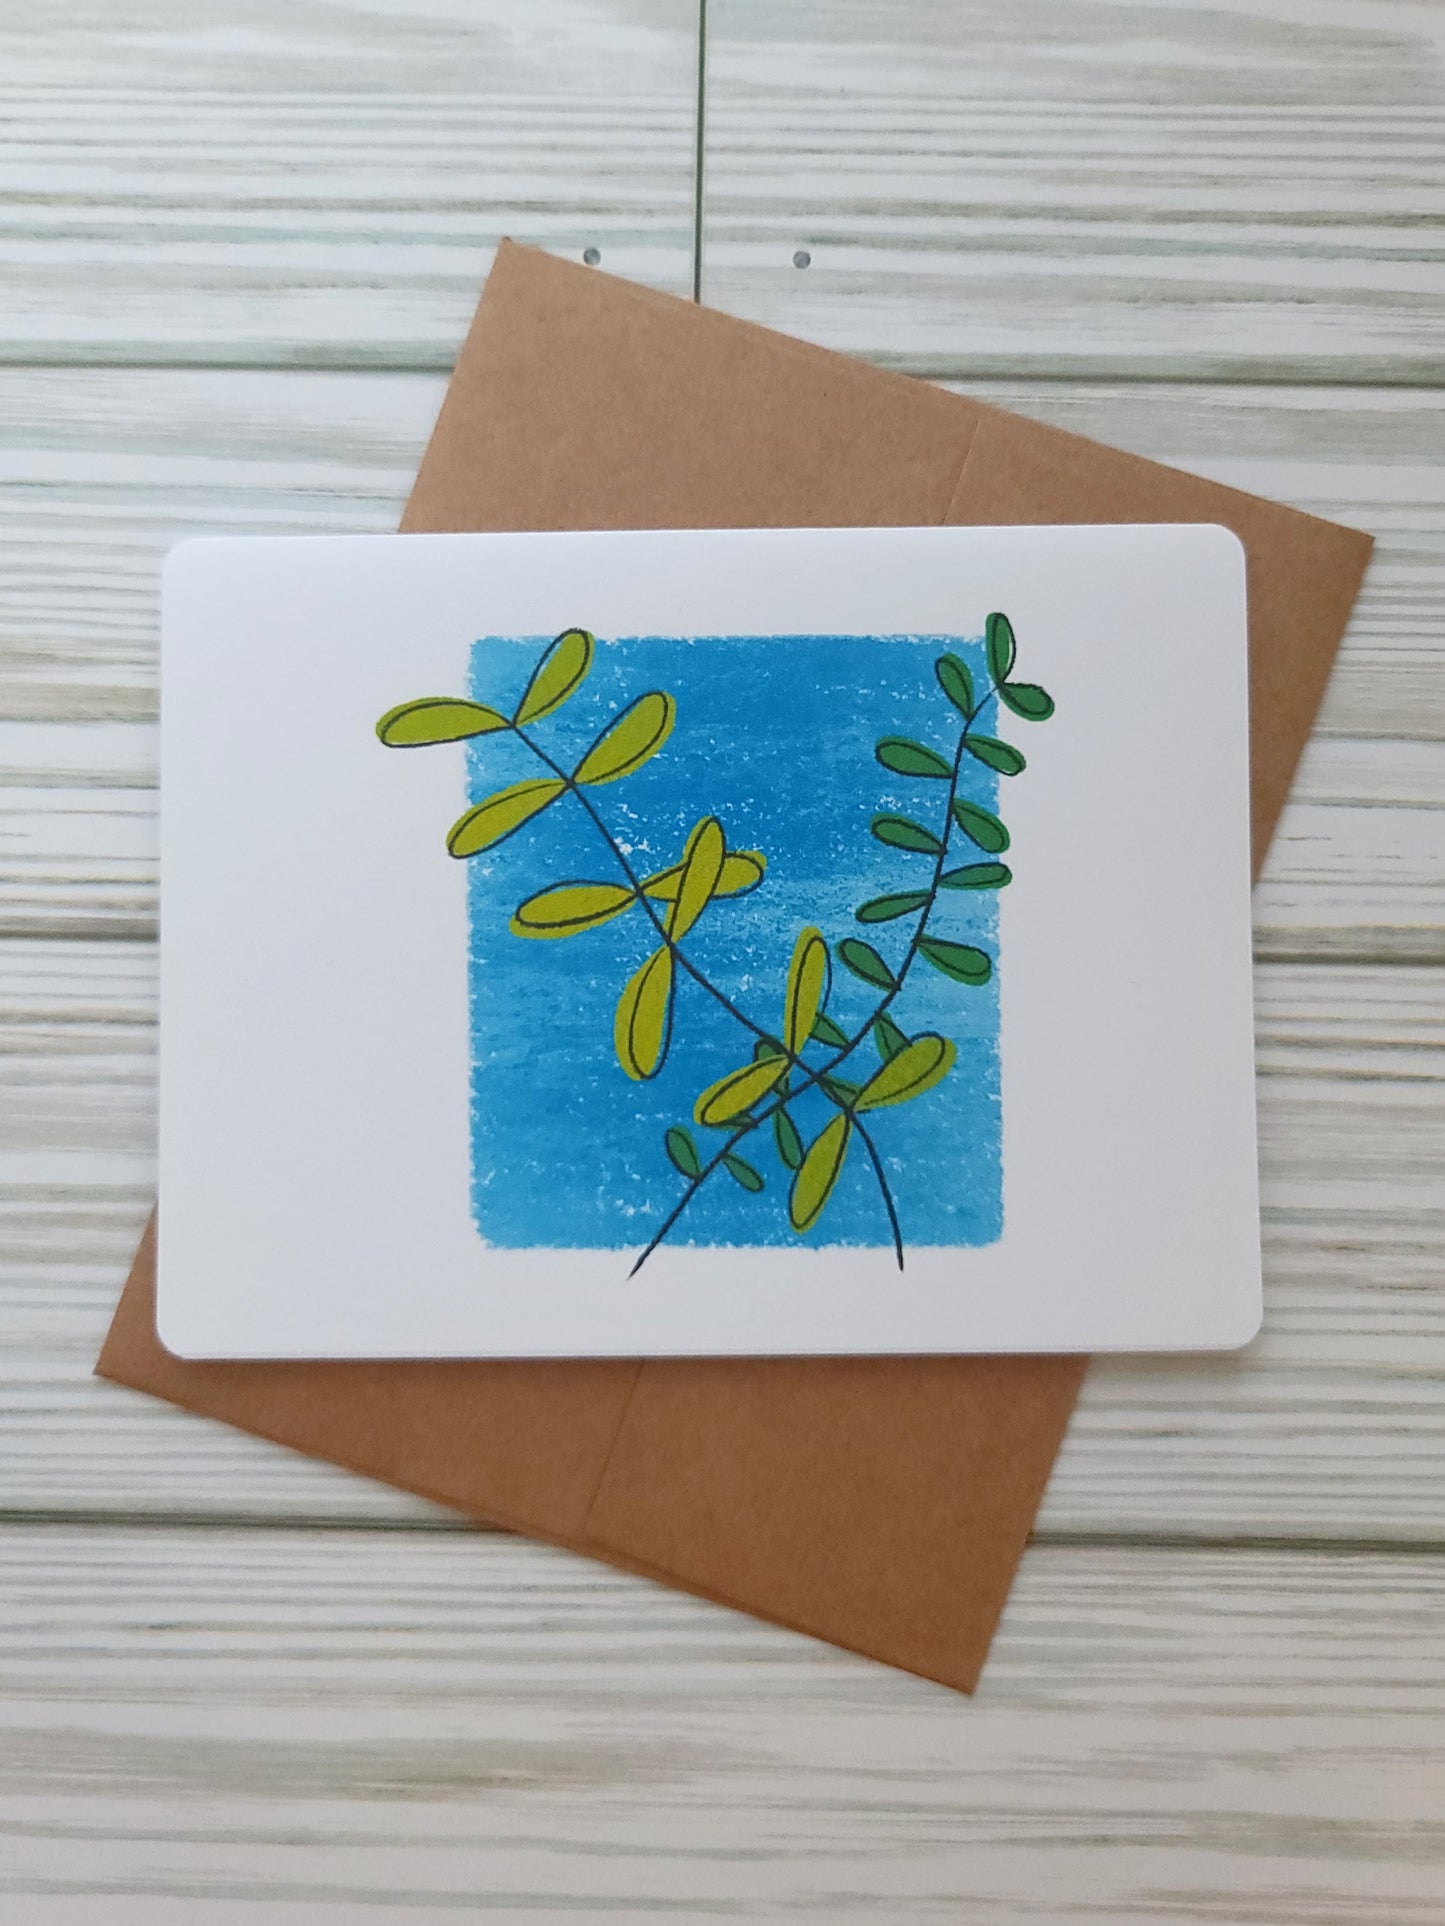 Plant Handmade Greeting Card - Recycled Paper and Kraft Paper - Overhead Shot